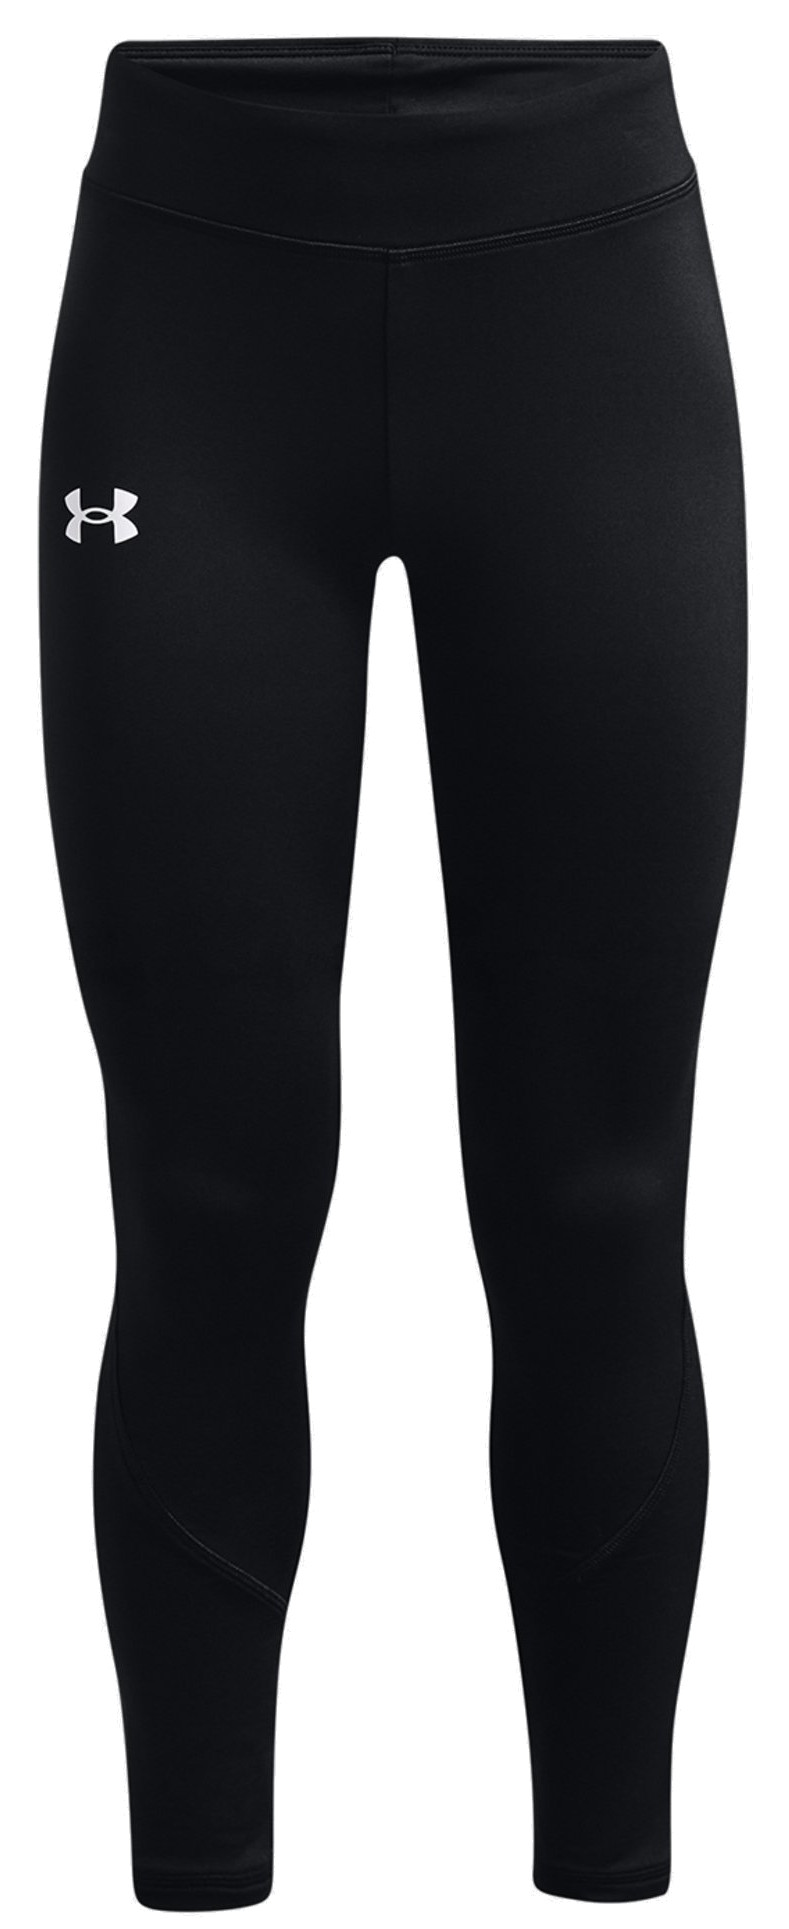 https://i1.t4s.cz/products/1366074-001/under-armour-cw-legging-blk-665562-1366074-001.jpg